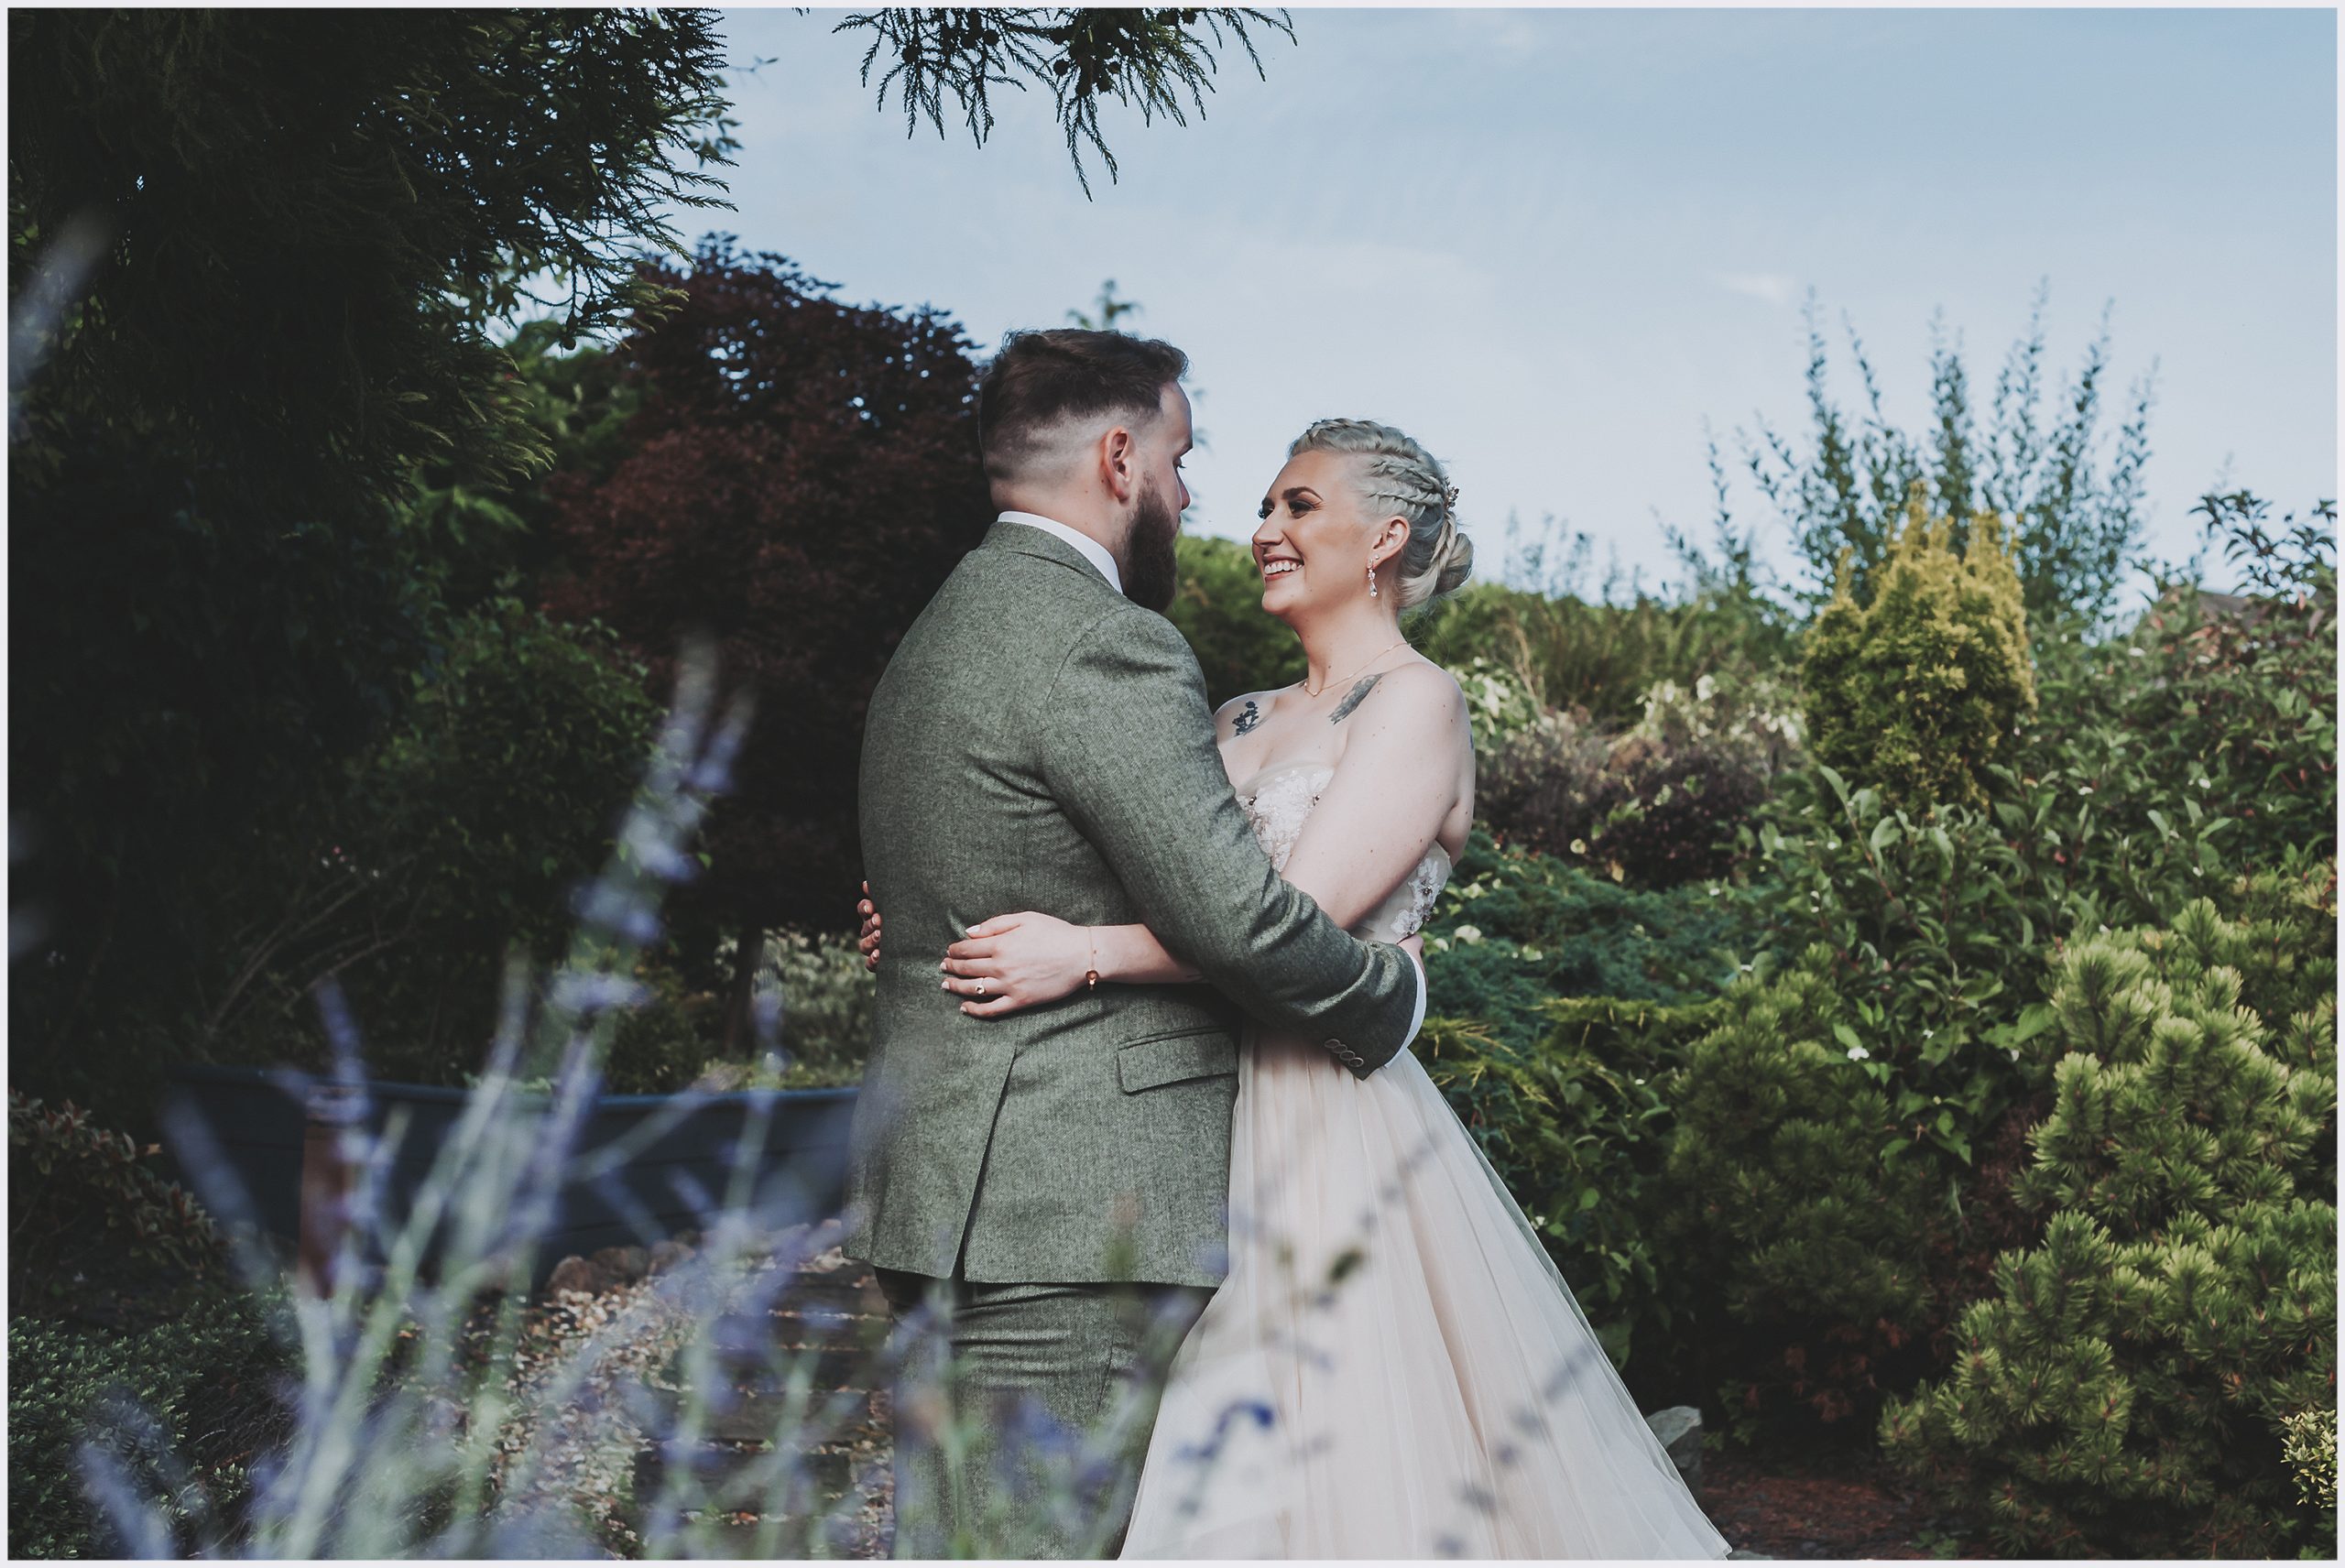 North Wales Wedding Magic: Bride and Groom in Dreamy Sunset Glow